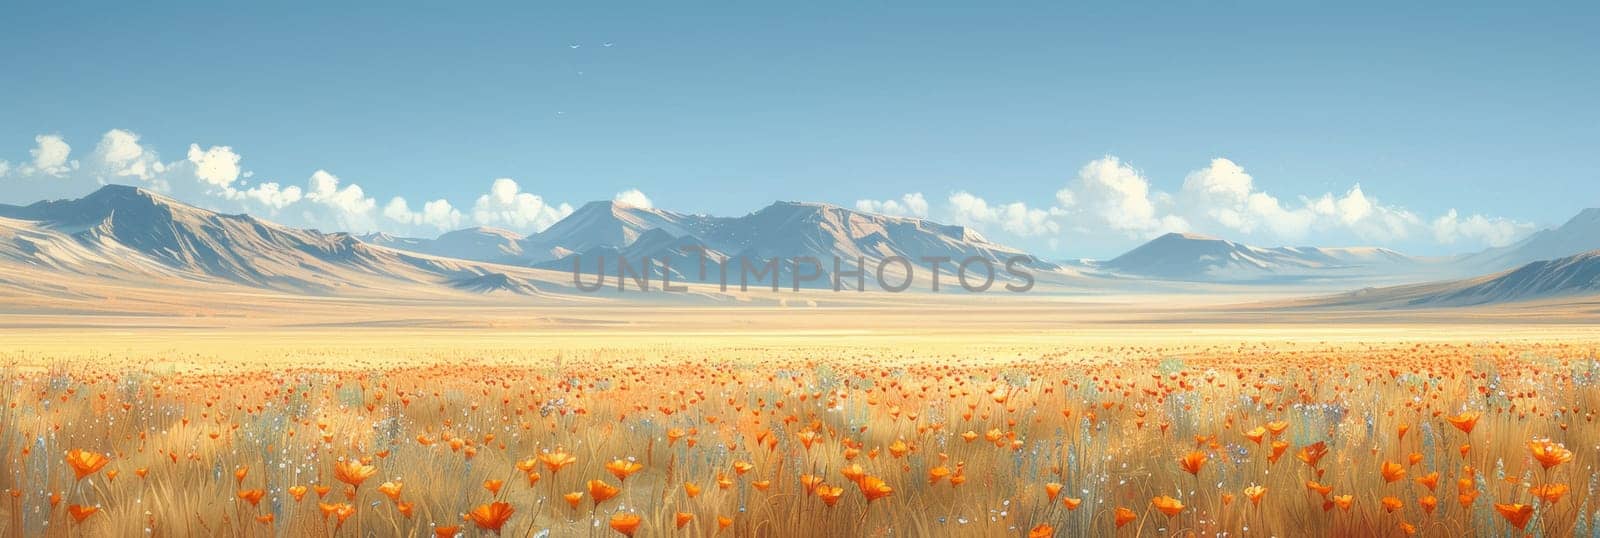 A large field of yellow flowers with mountains in the background, AI by starush